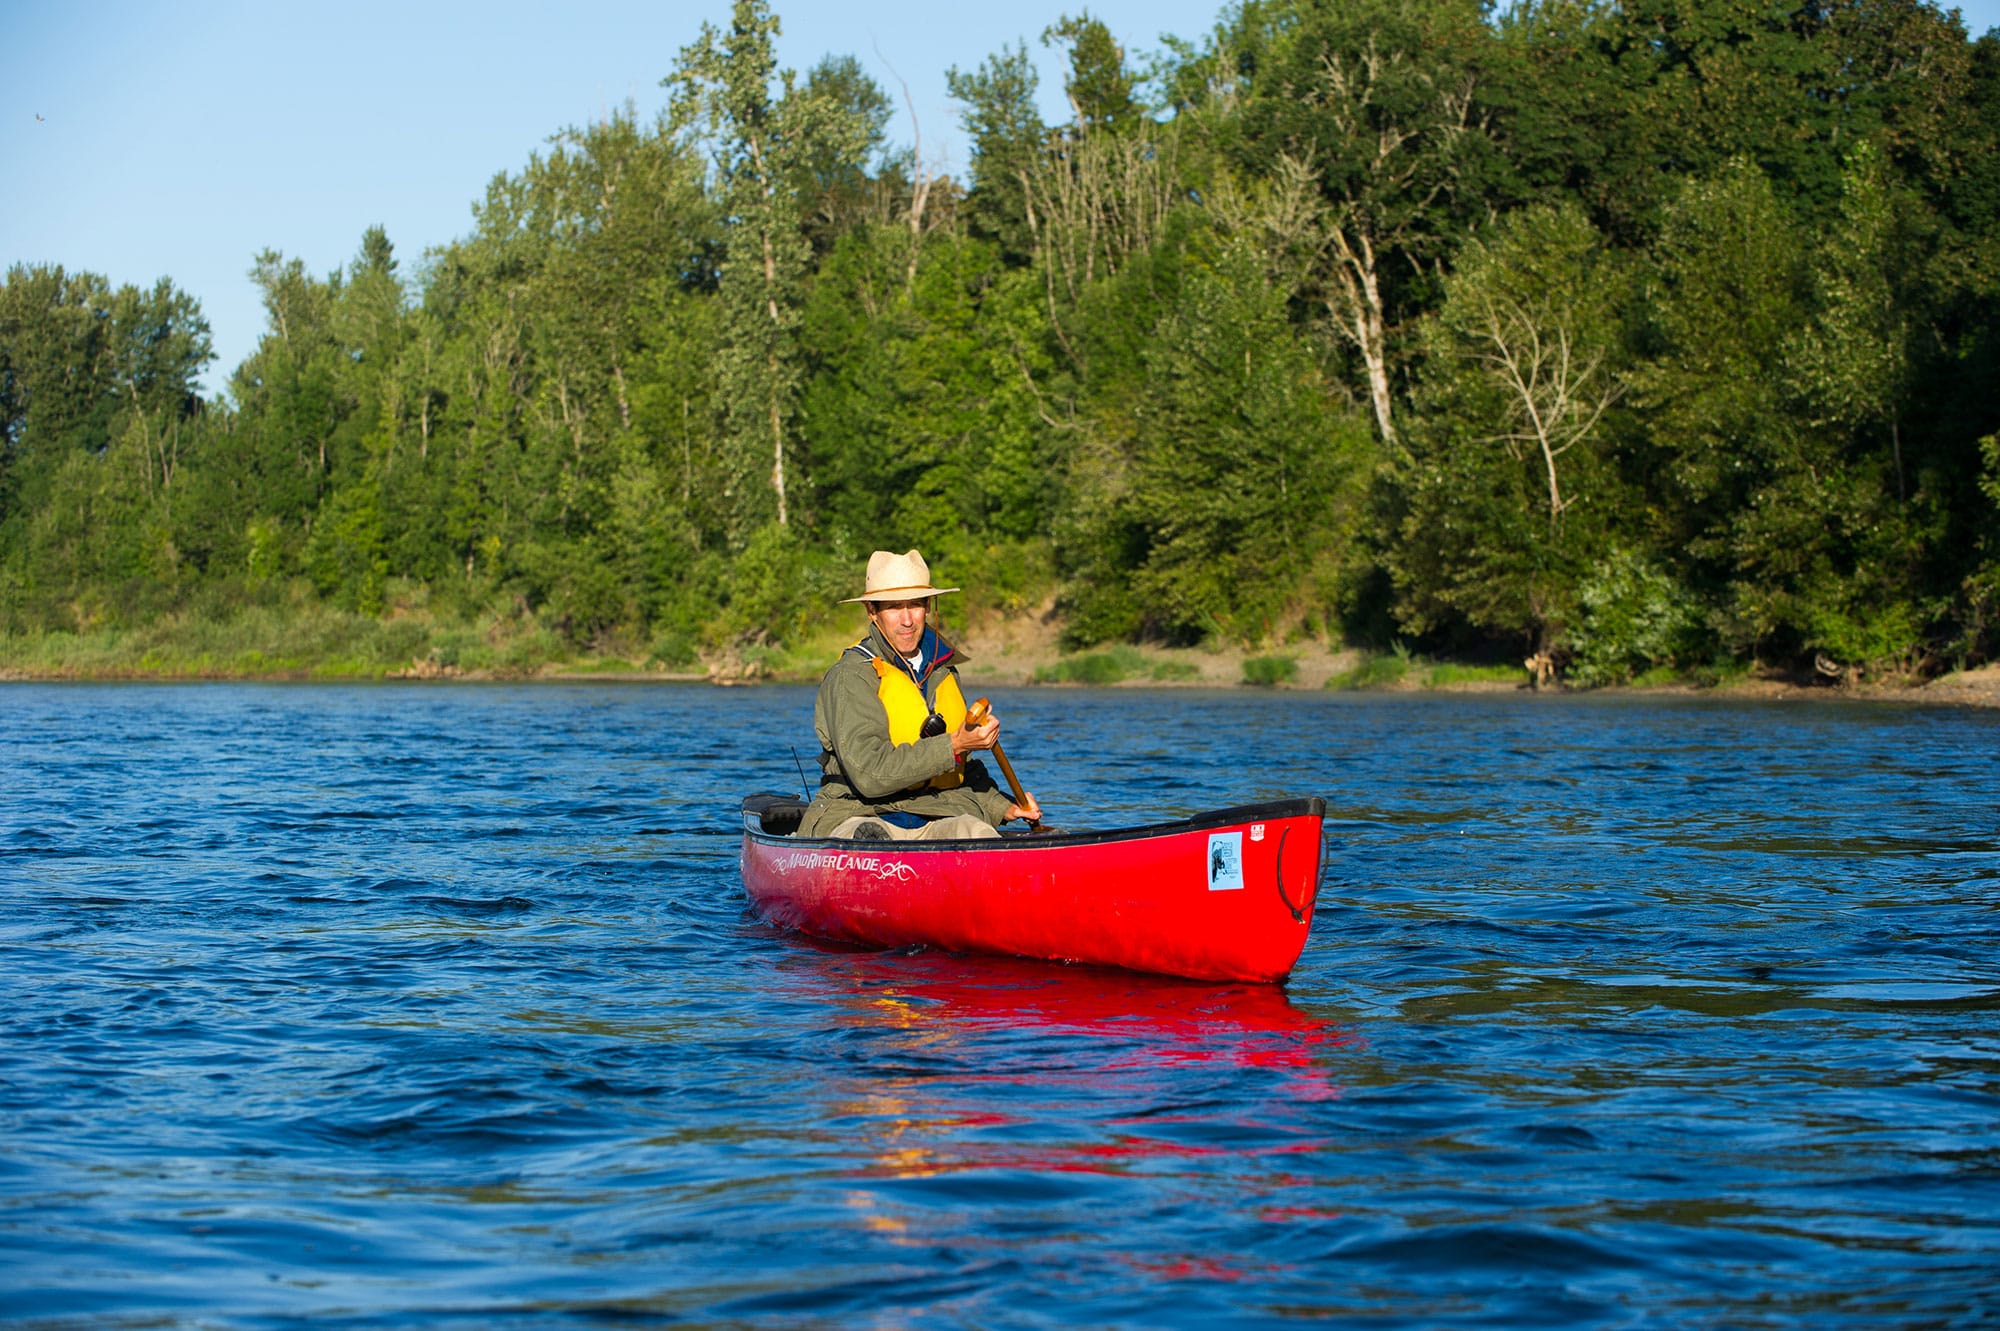 A man in a red canoe.